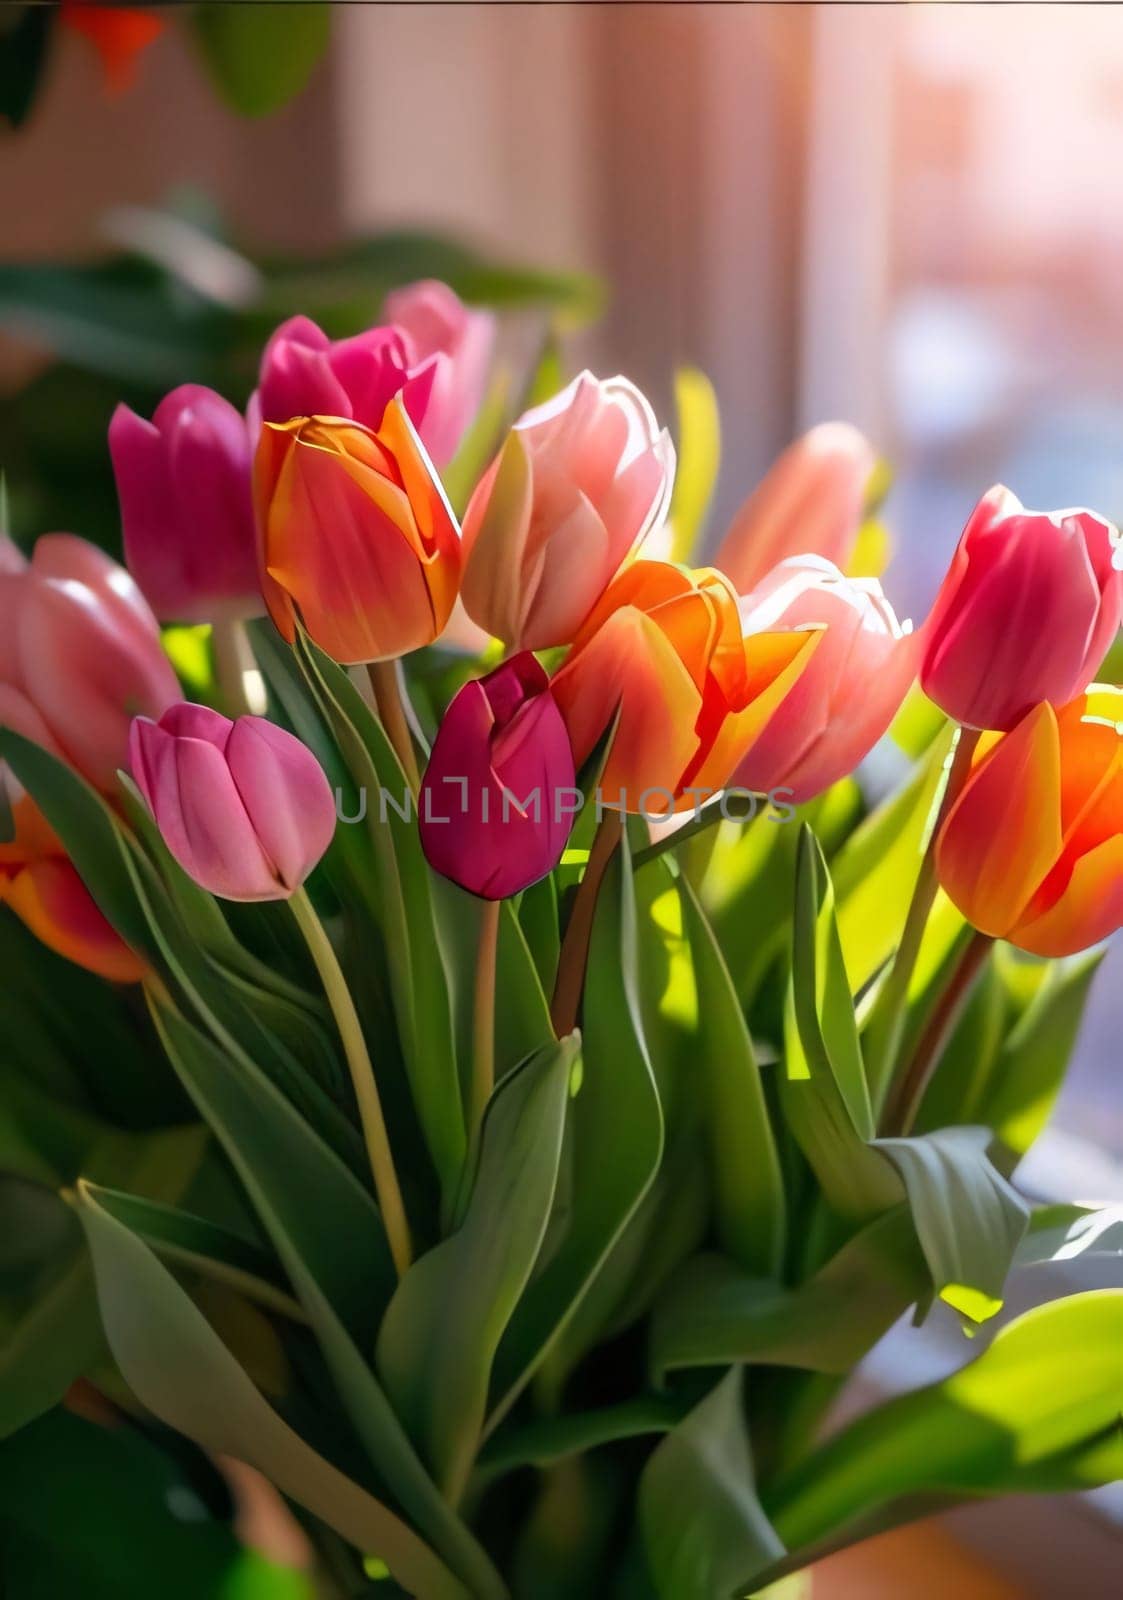 Bouquet of colorful tulips, green leaves, smudged background. Flowering flowers, a symbol of spring, new life. A joyful time of nature waking up to life.